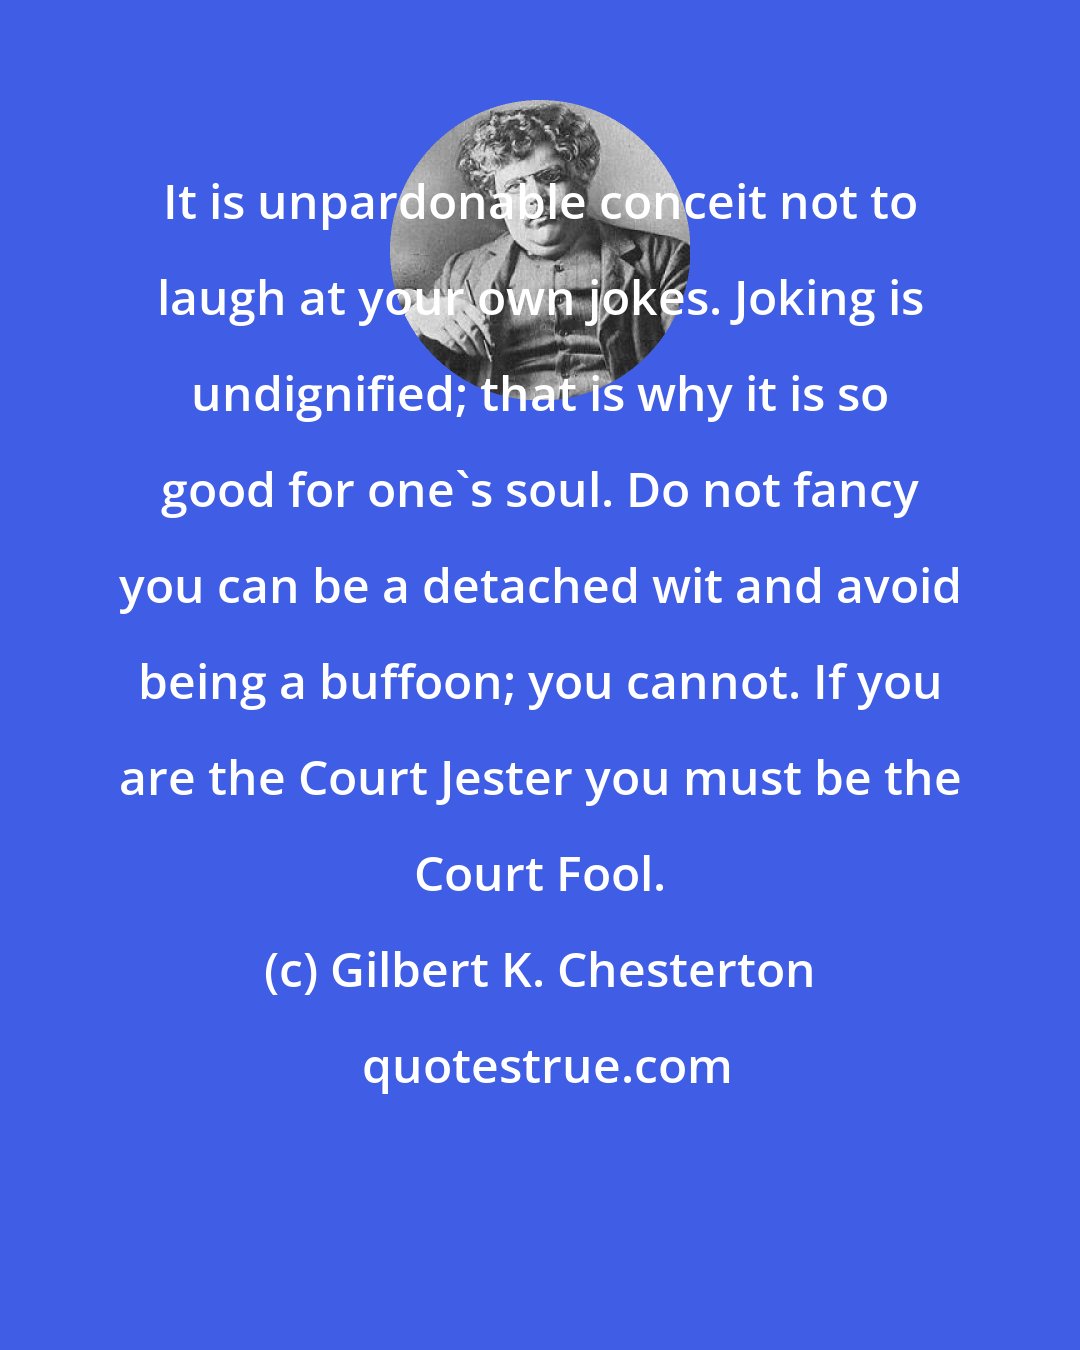 Gilbert K. Chesterton: It is unpardonable conceit not to laugh at your own jokes. Joking is undignified; that is why it is so good for one's soul. Do not fancy you can be a detached wit and avoid being a buffoon; you cannot. If you are the Court Jester you must be the Court Fool.